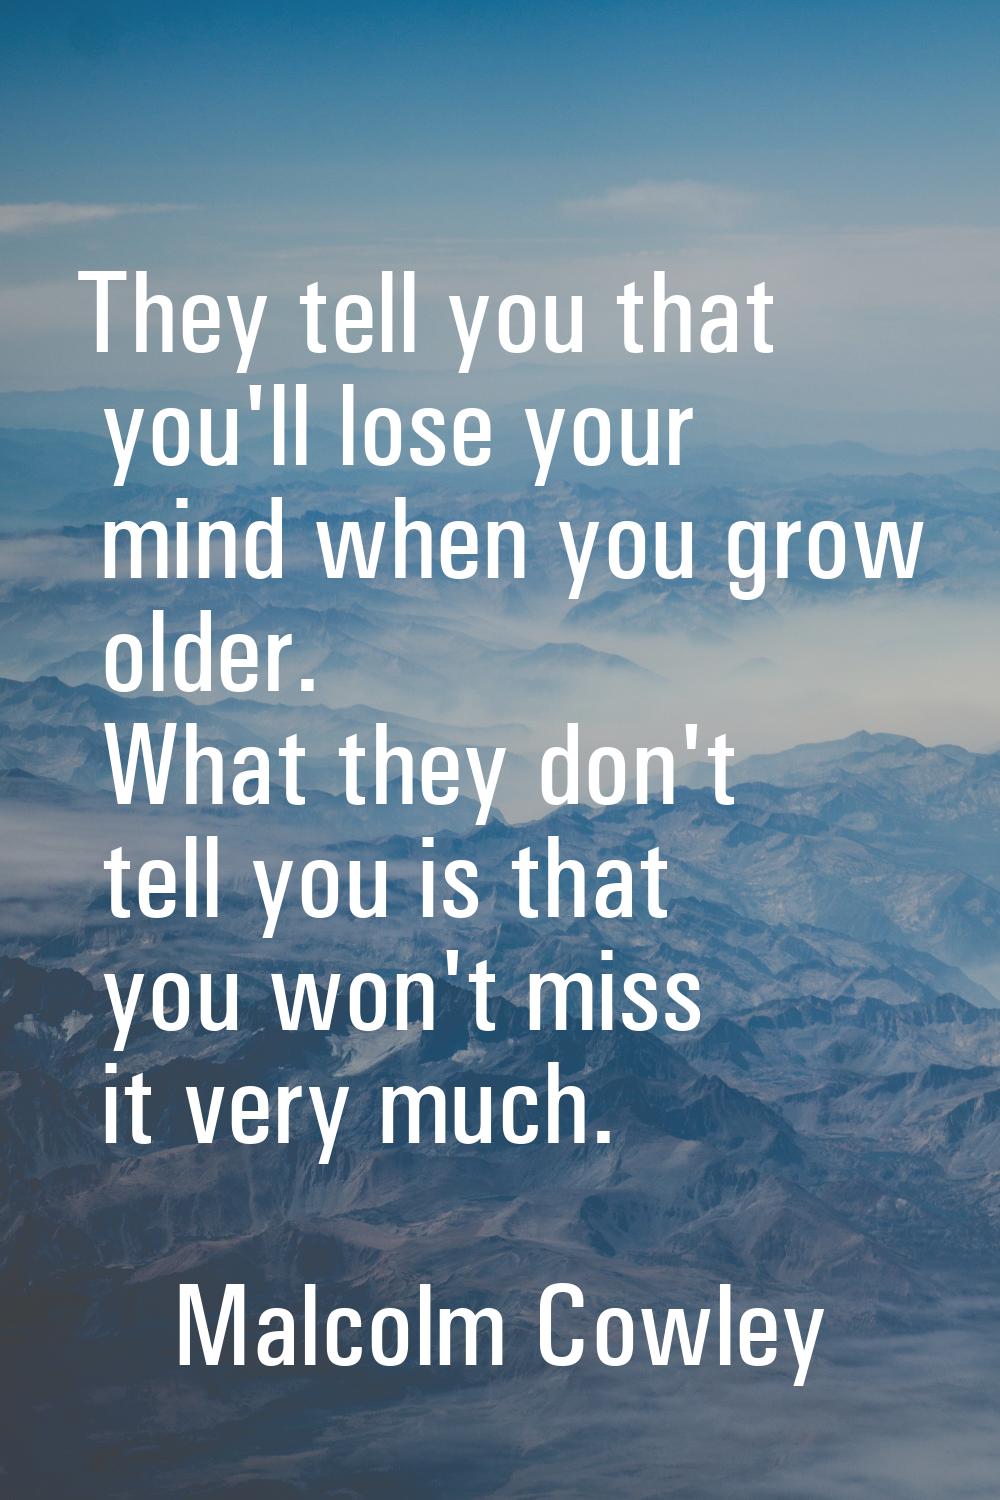 They tell you that you'll lose your mind when you grow older. What they don't tell you is that you 